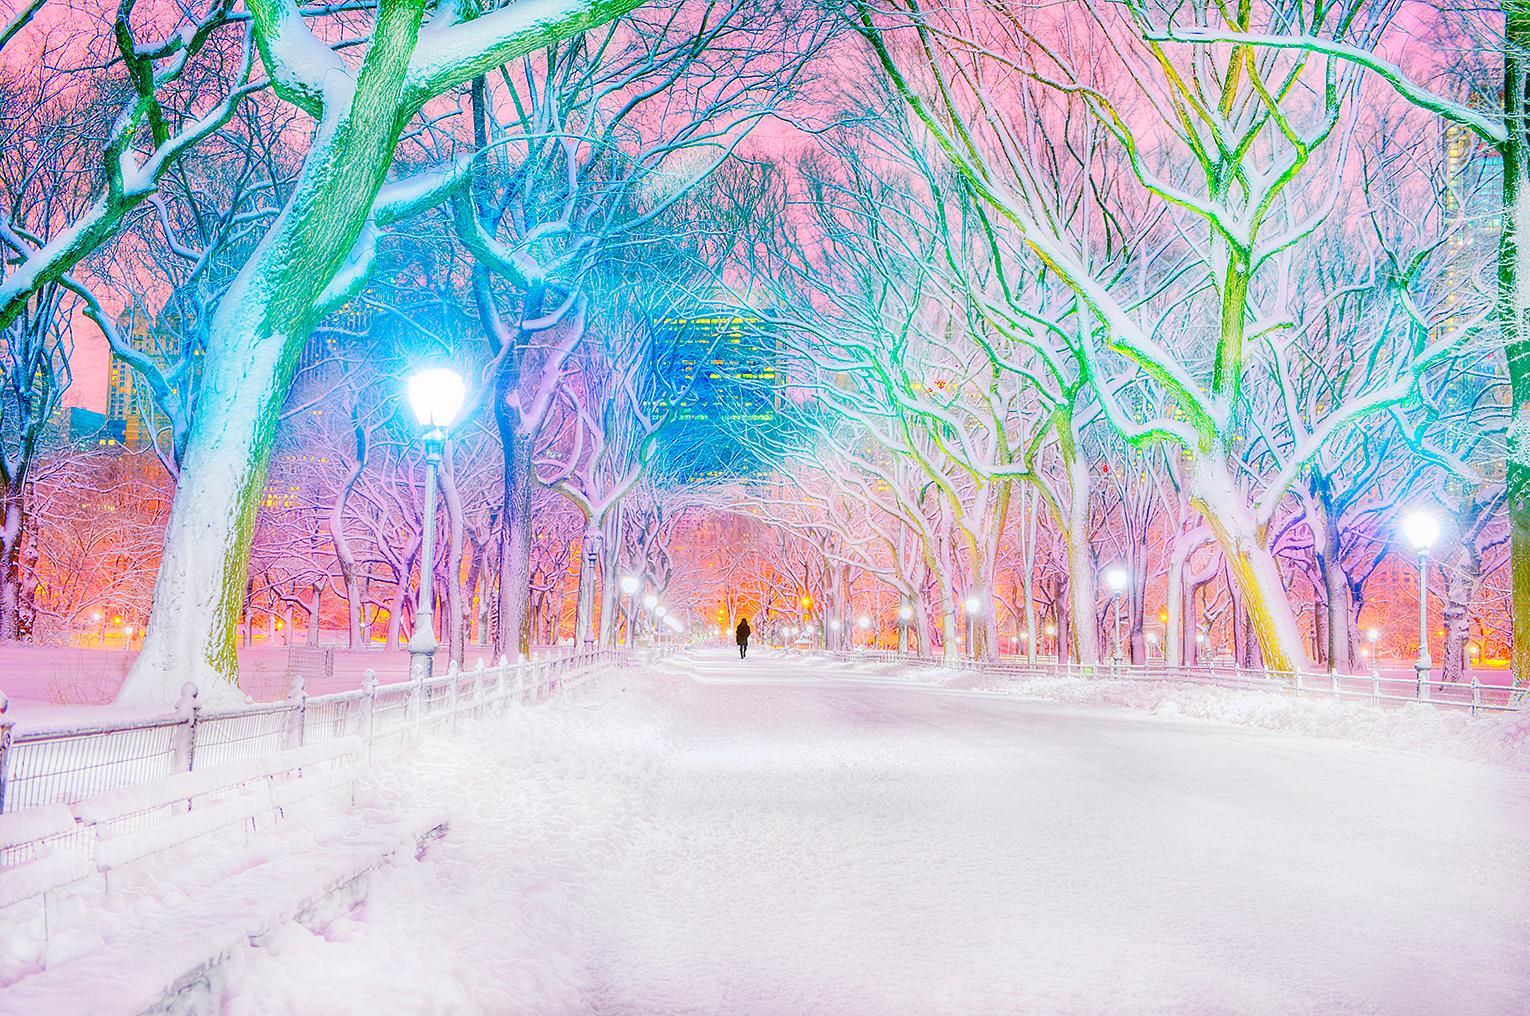 Mitchell Funk Landscape Photograph - Central Park Pink Dawn In Snowstorm, New York City